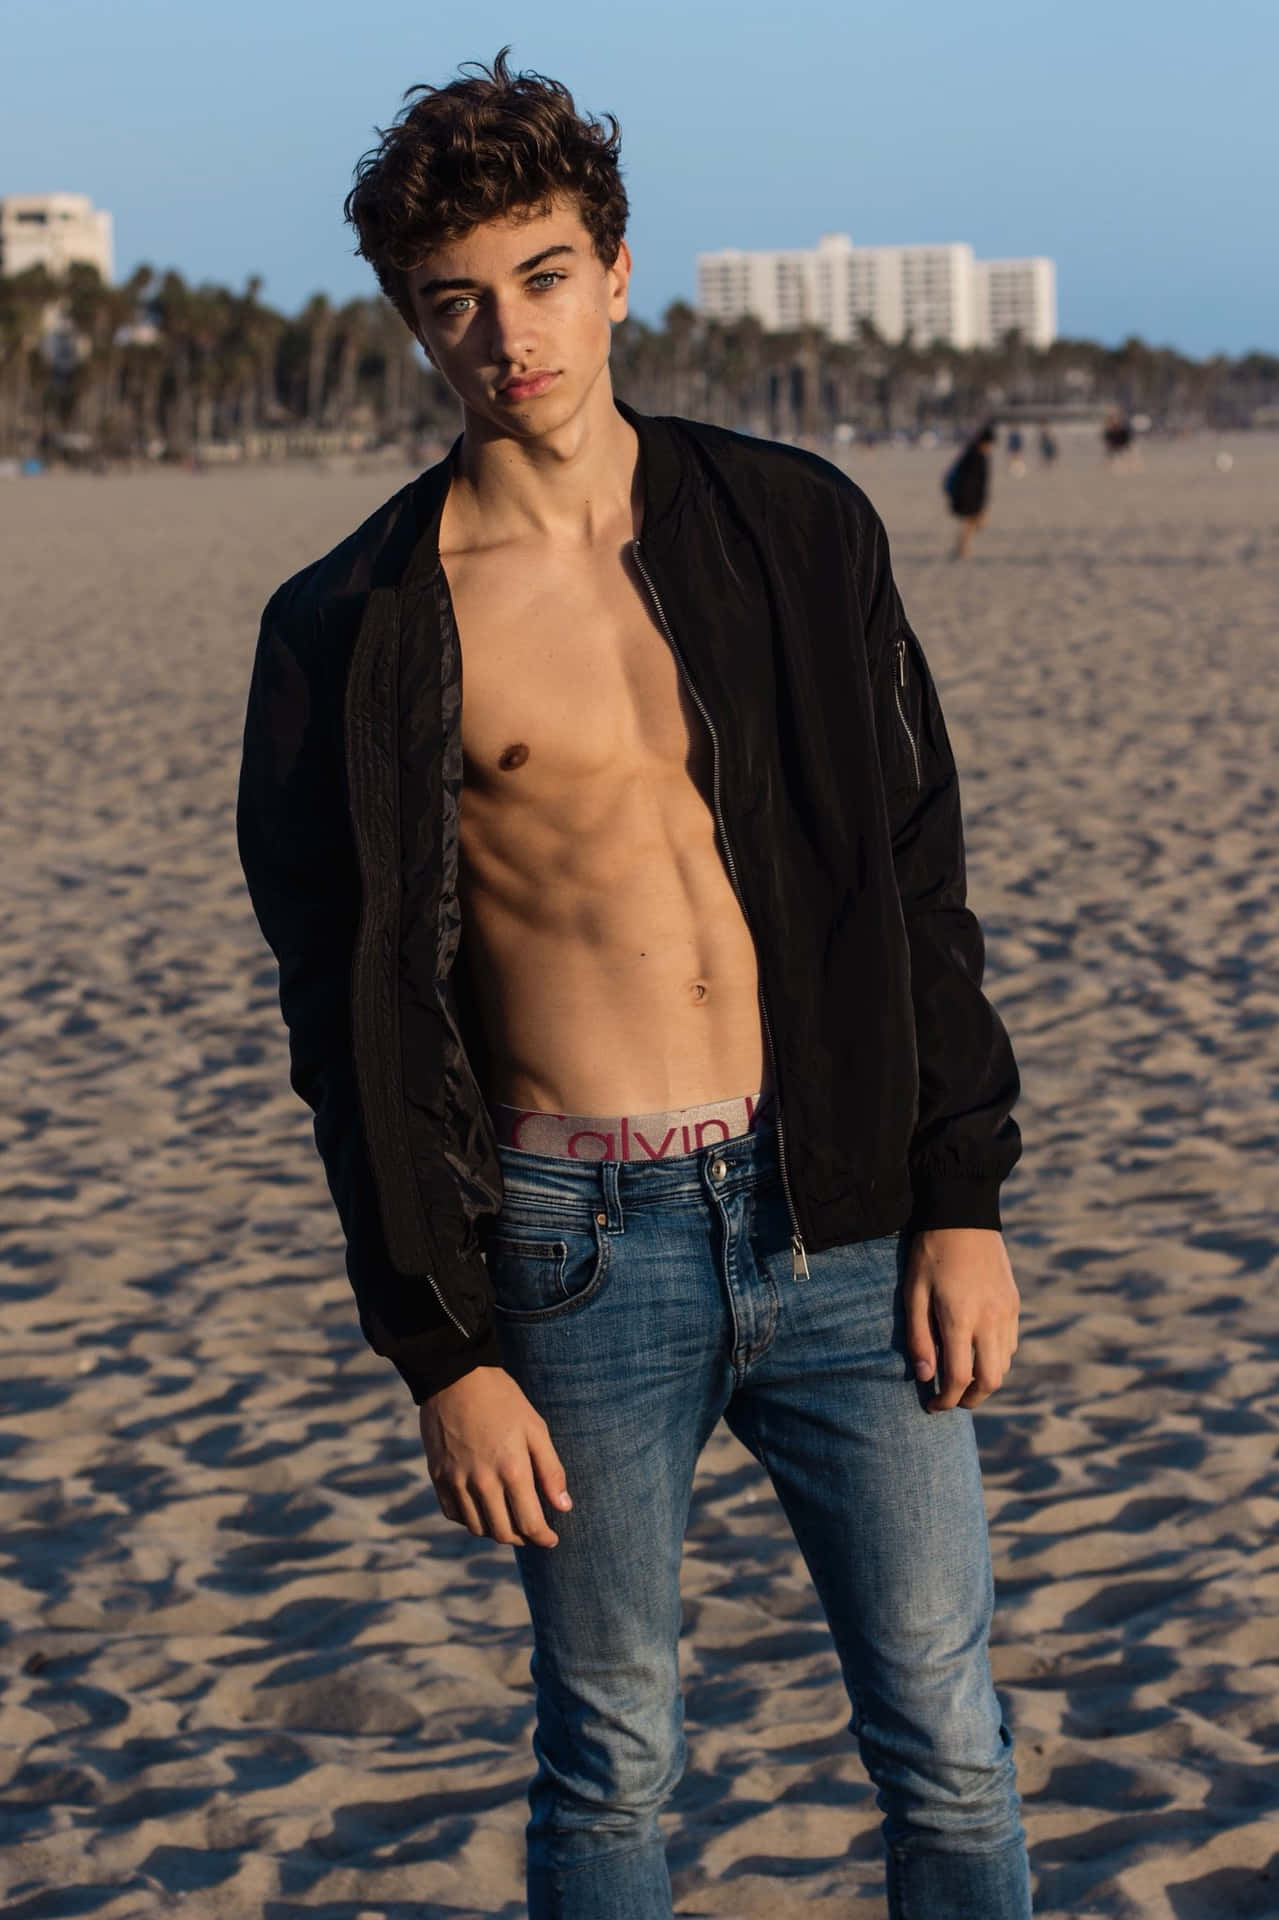 Shirtless Young Man Beach Portrait Background